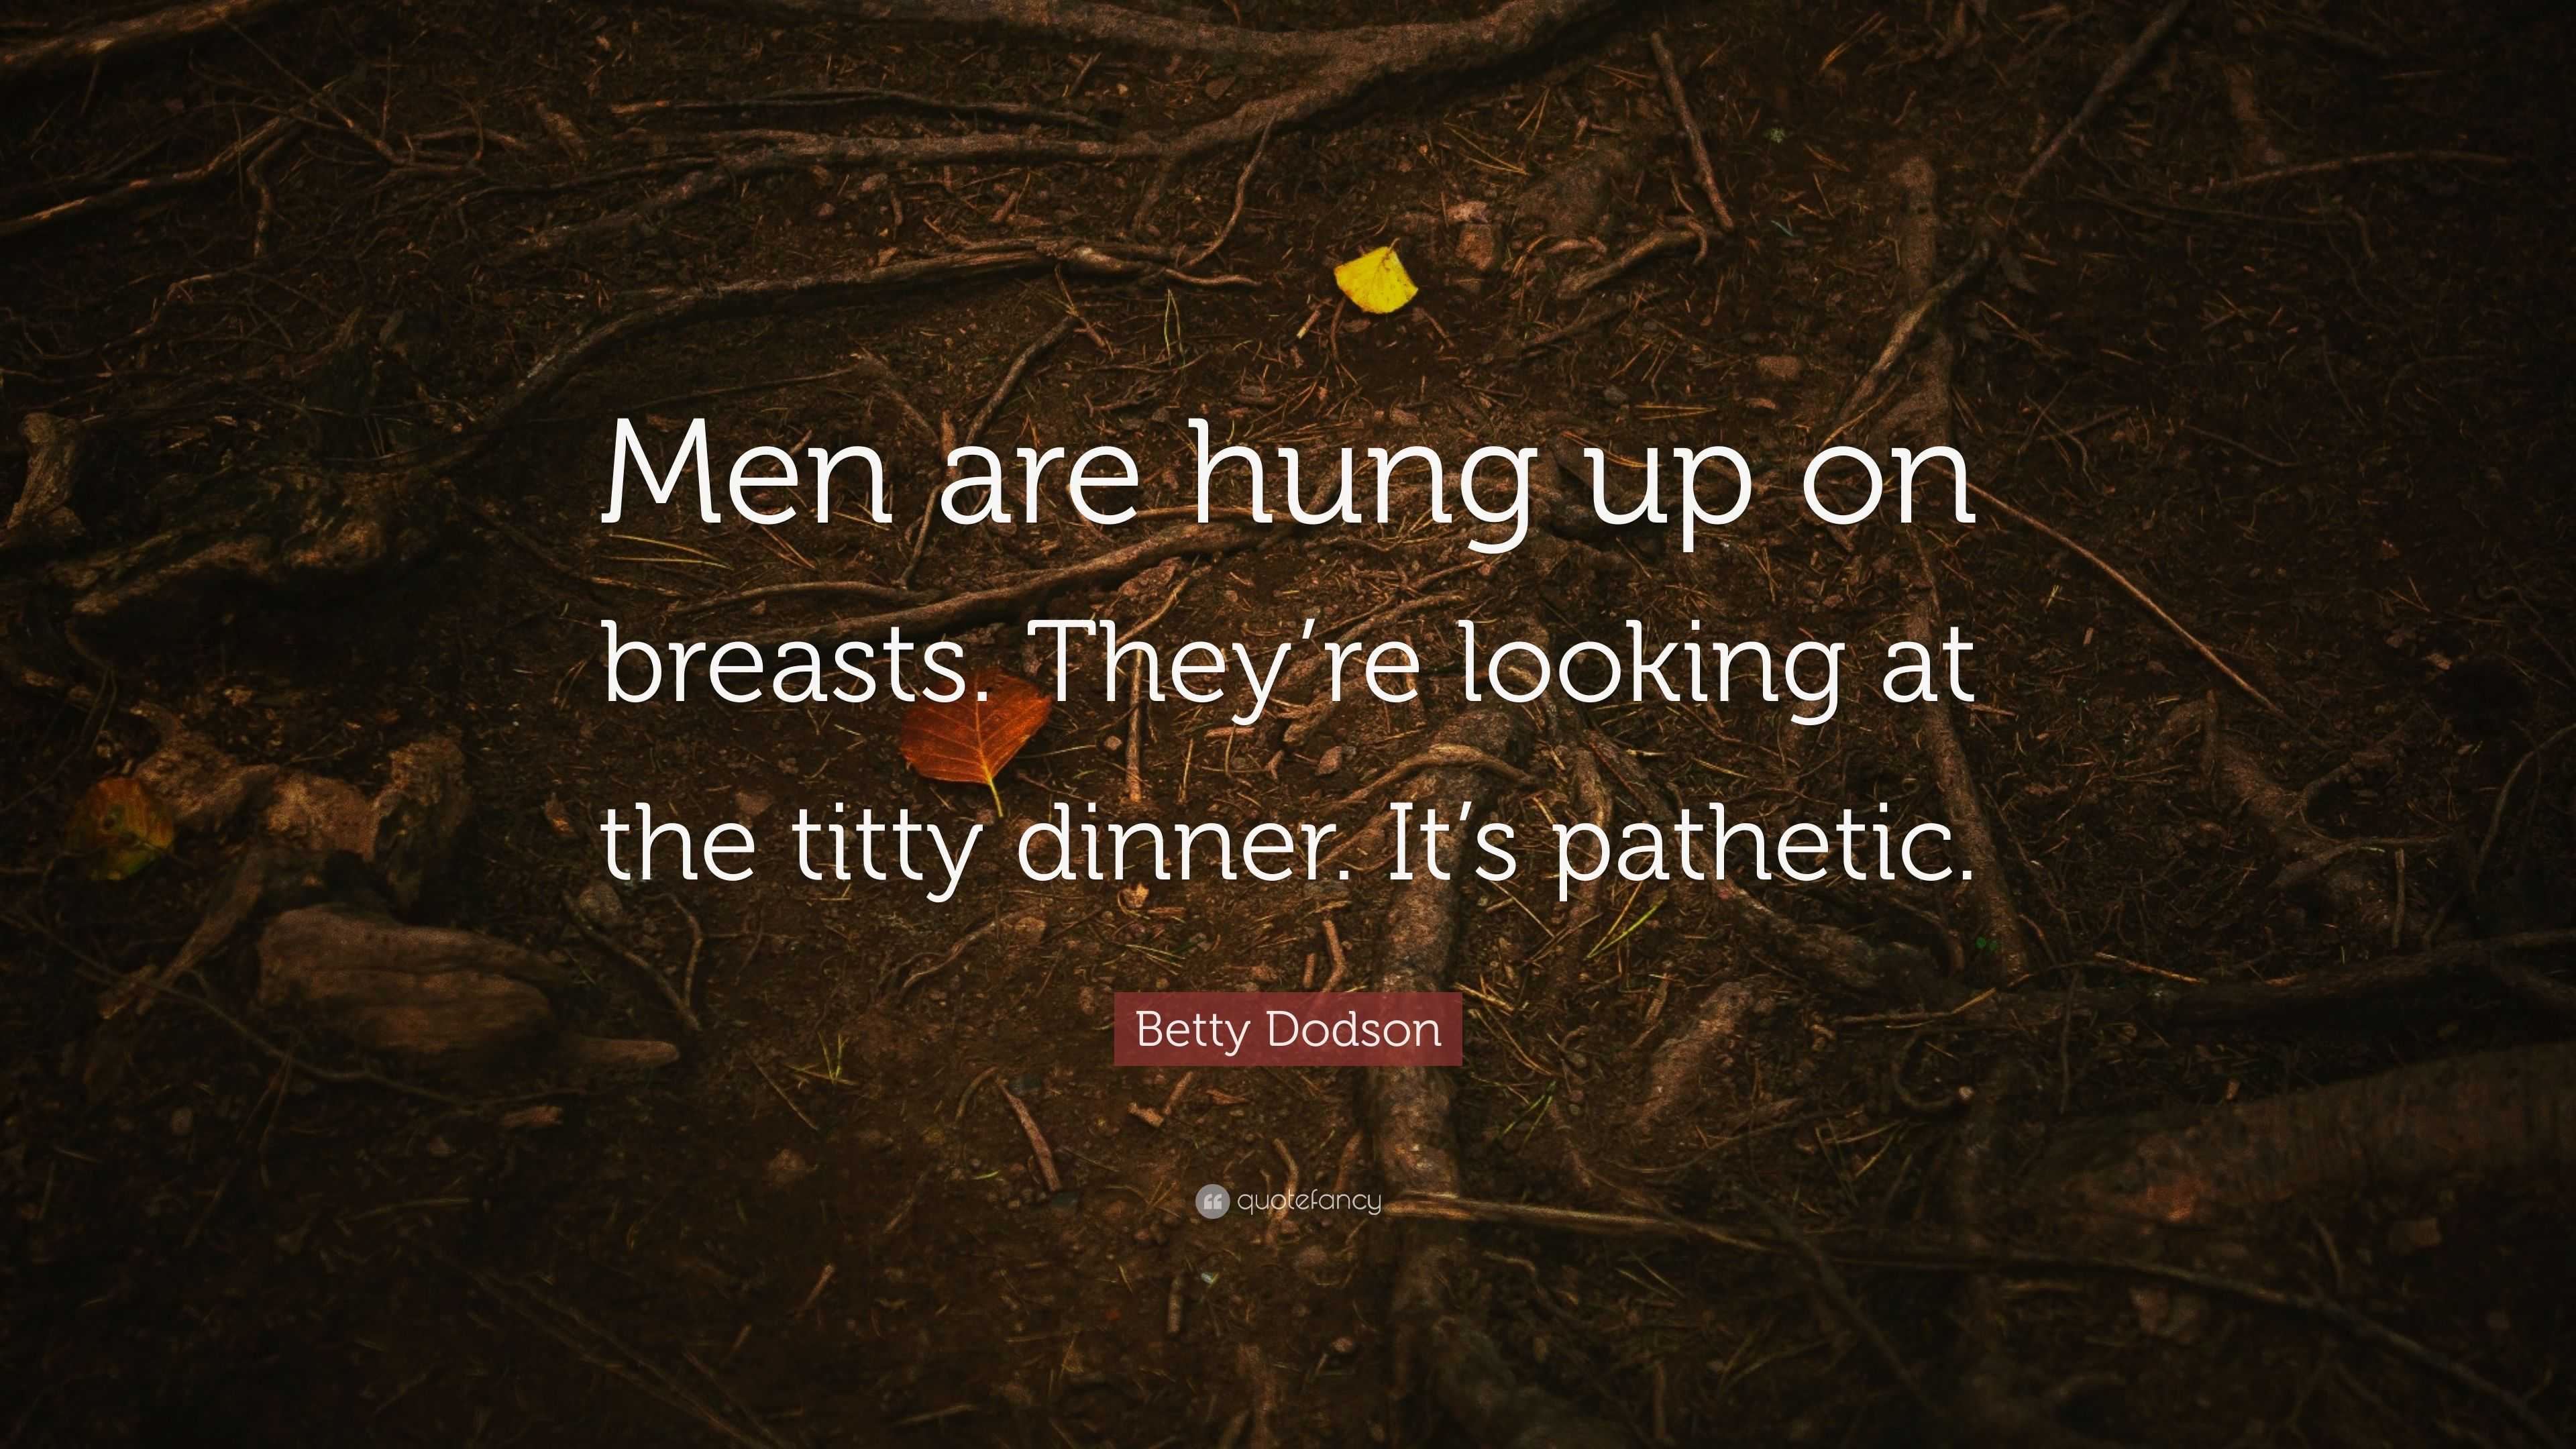 Betty Dodson Quote “men Are Hung Up On Breasts Theyre Looking At The